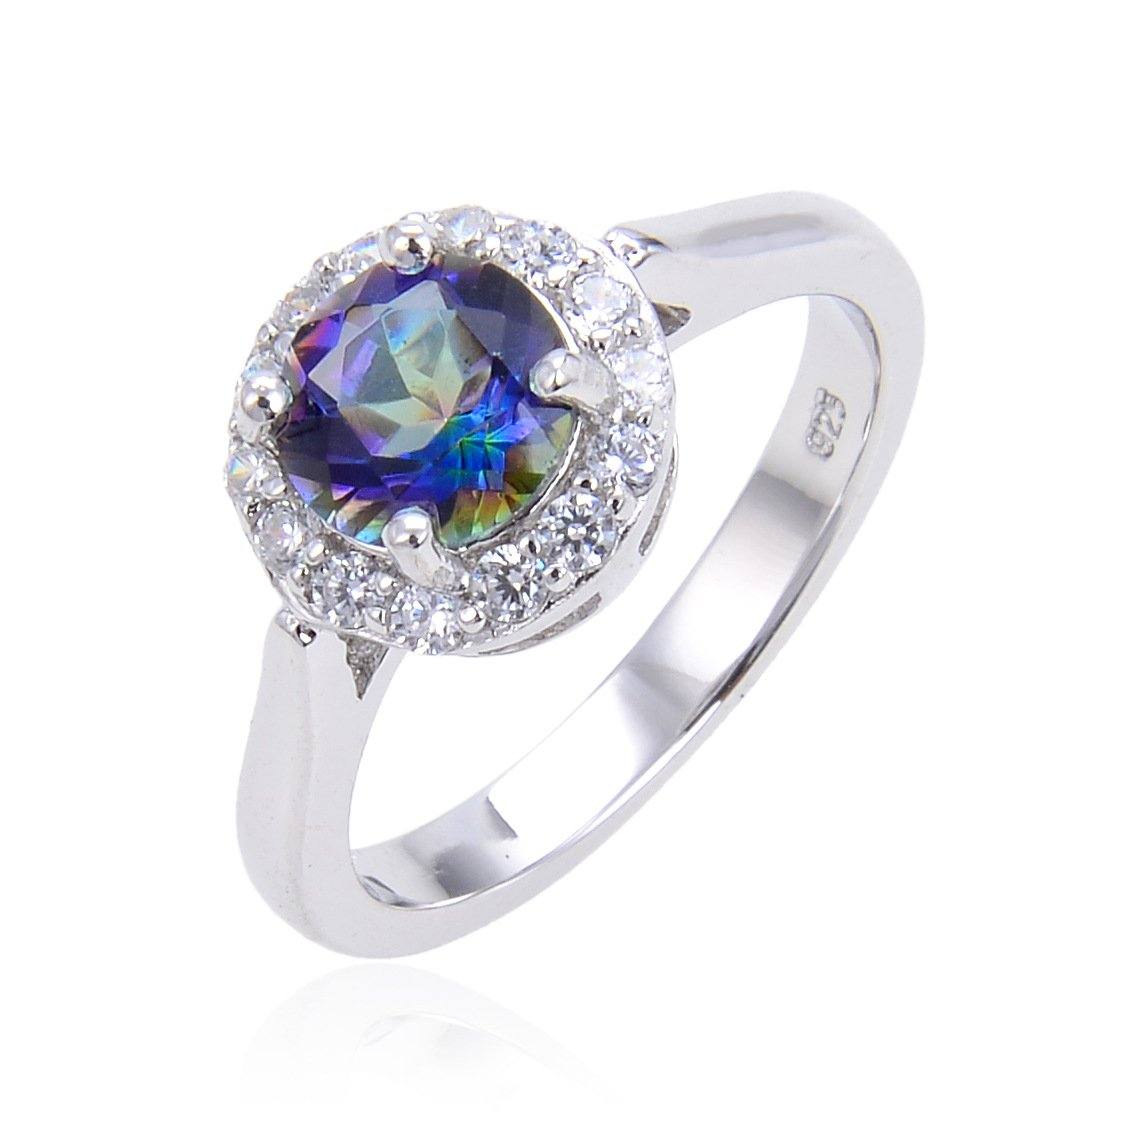 Mystic Topaz Engagement Ring - HERS